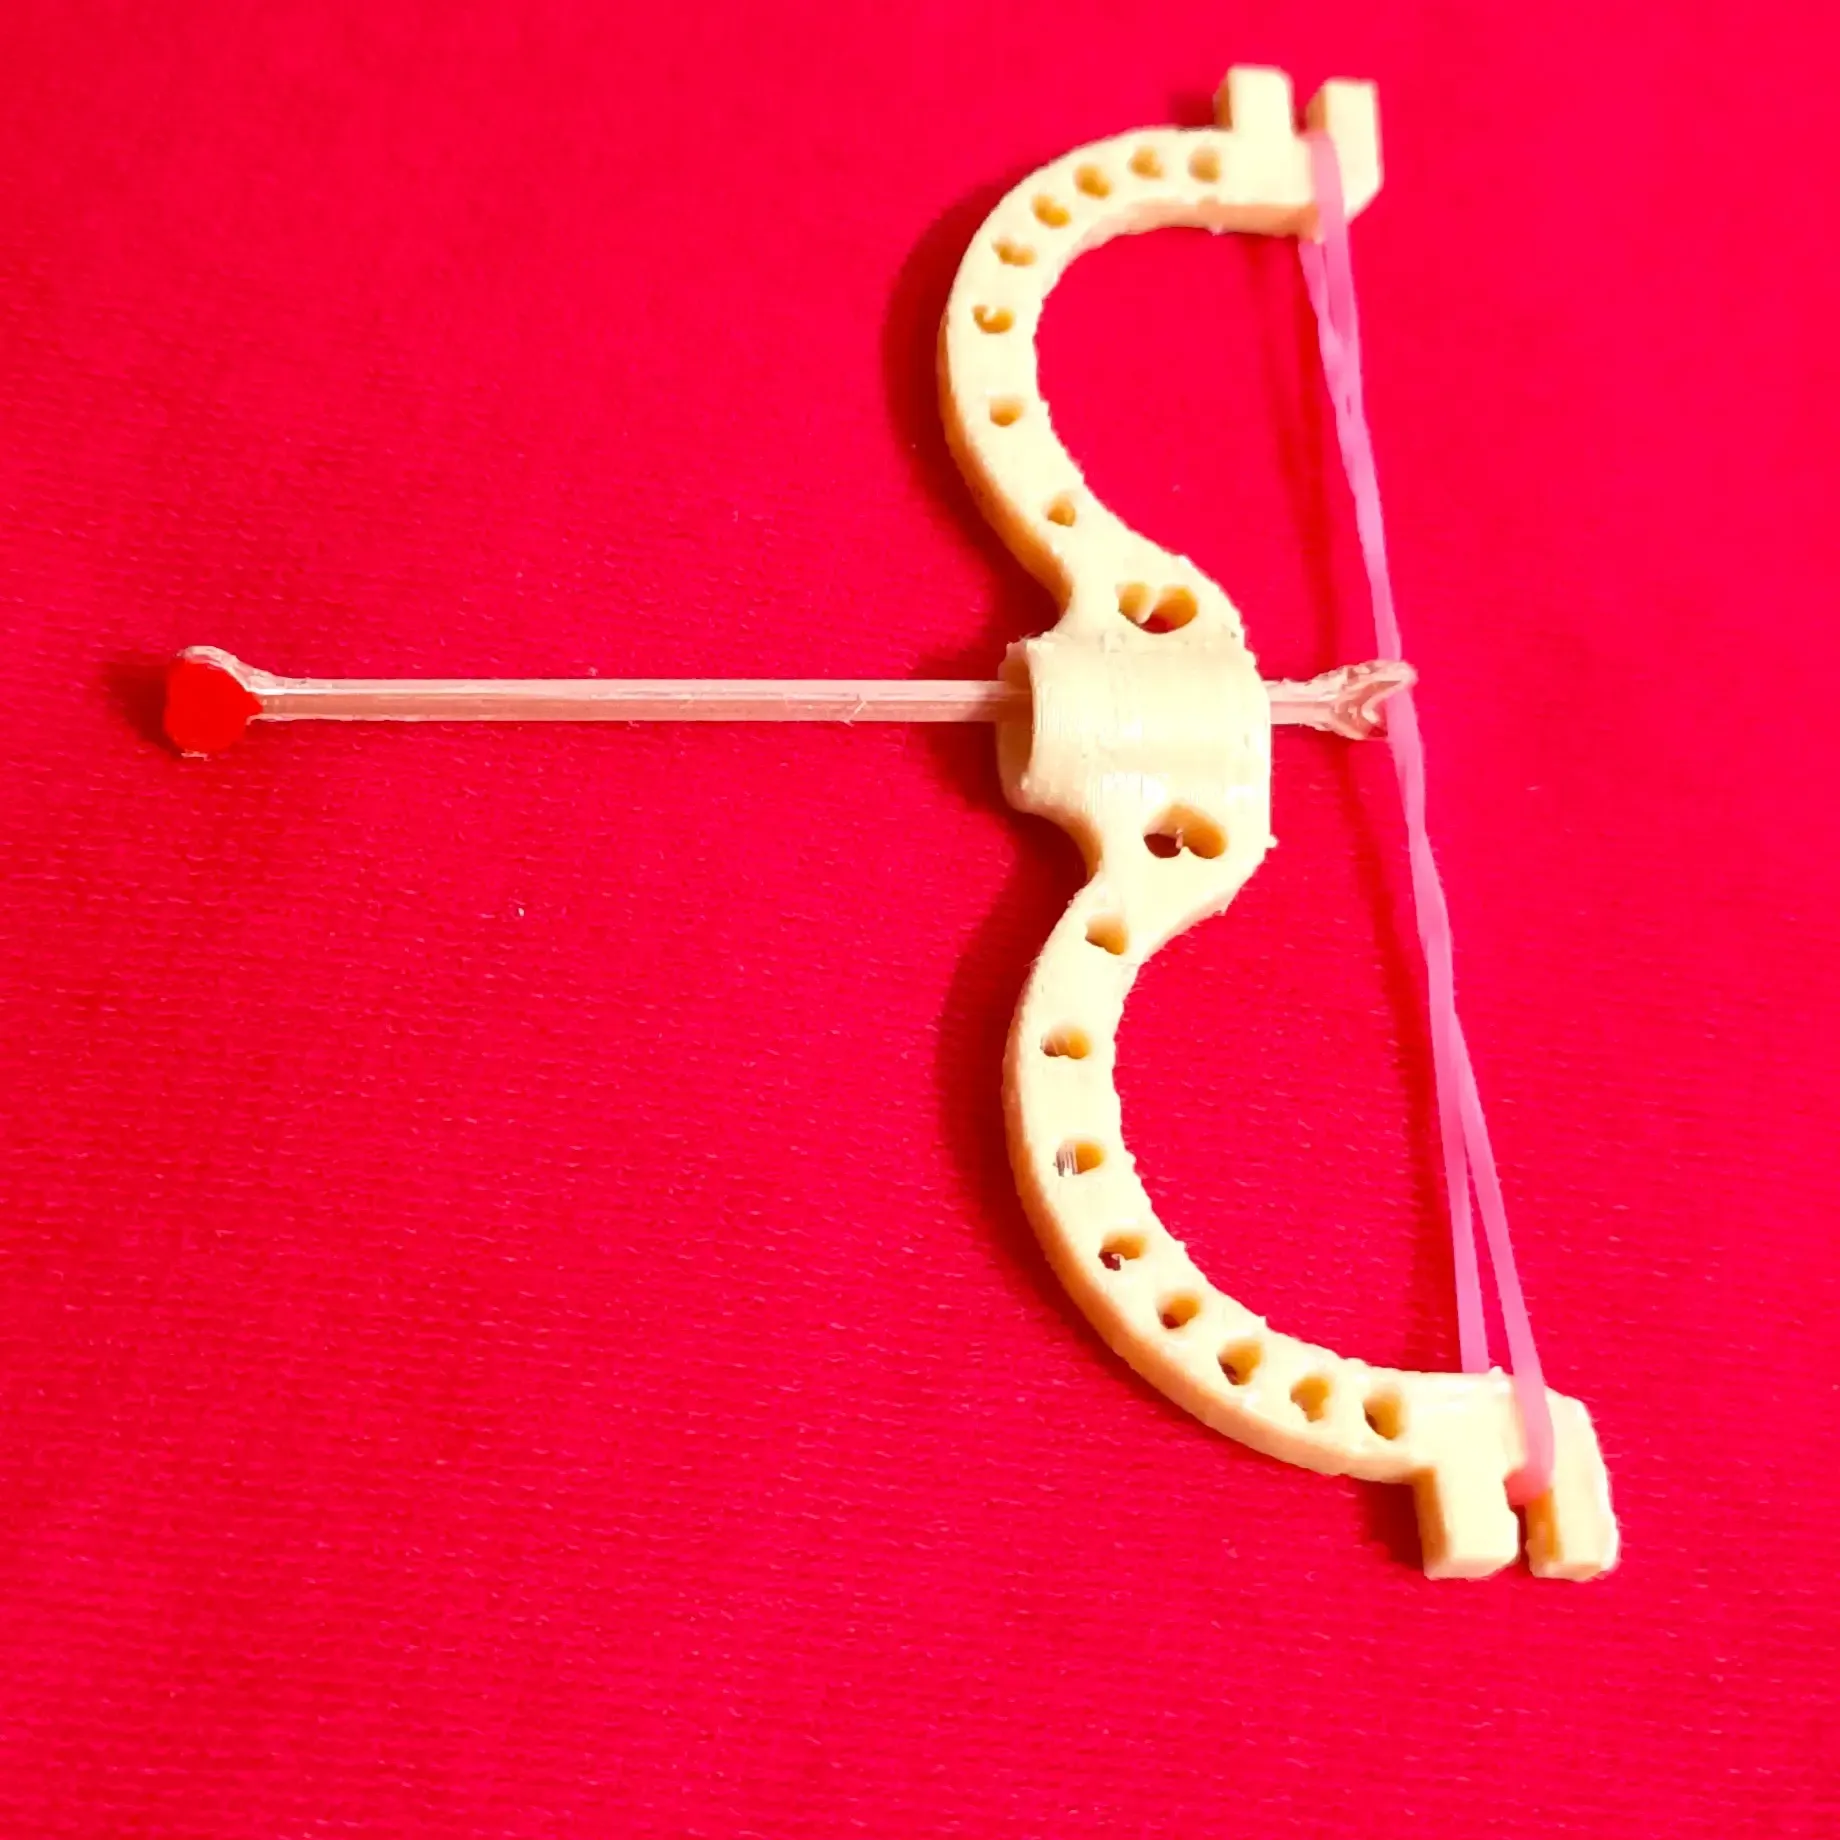 Cupid Rubber band bow and arrow